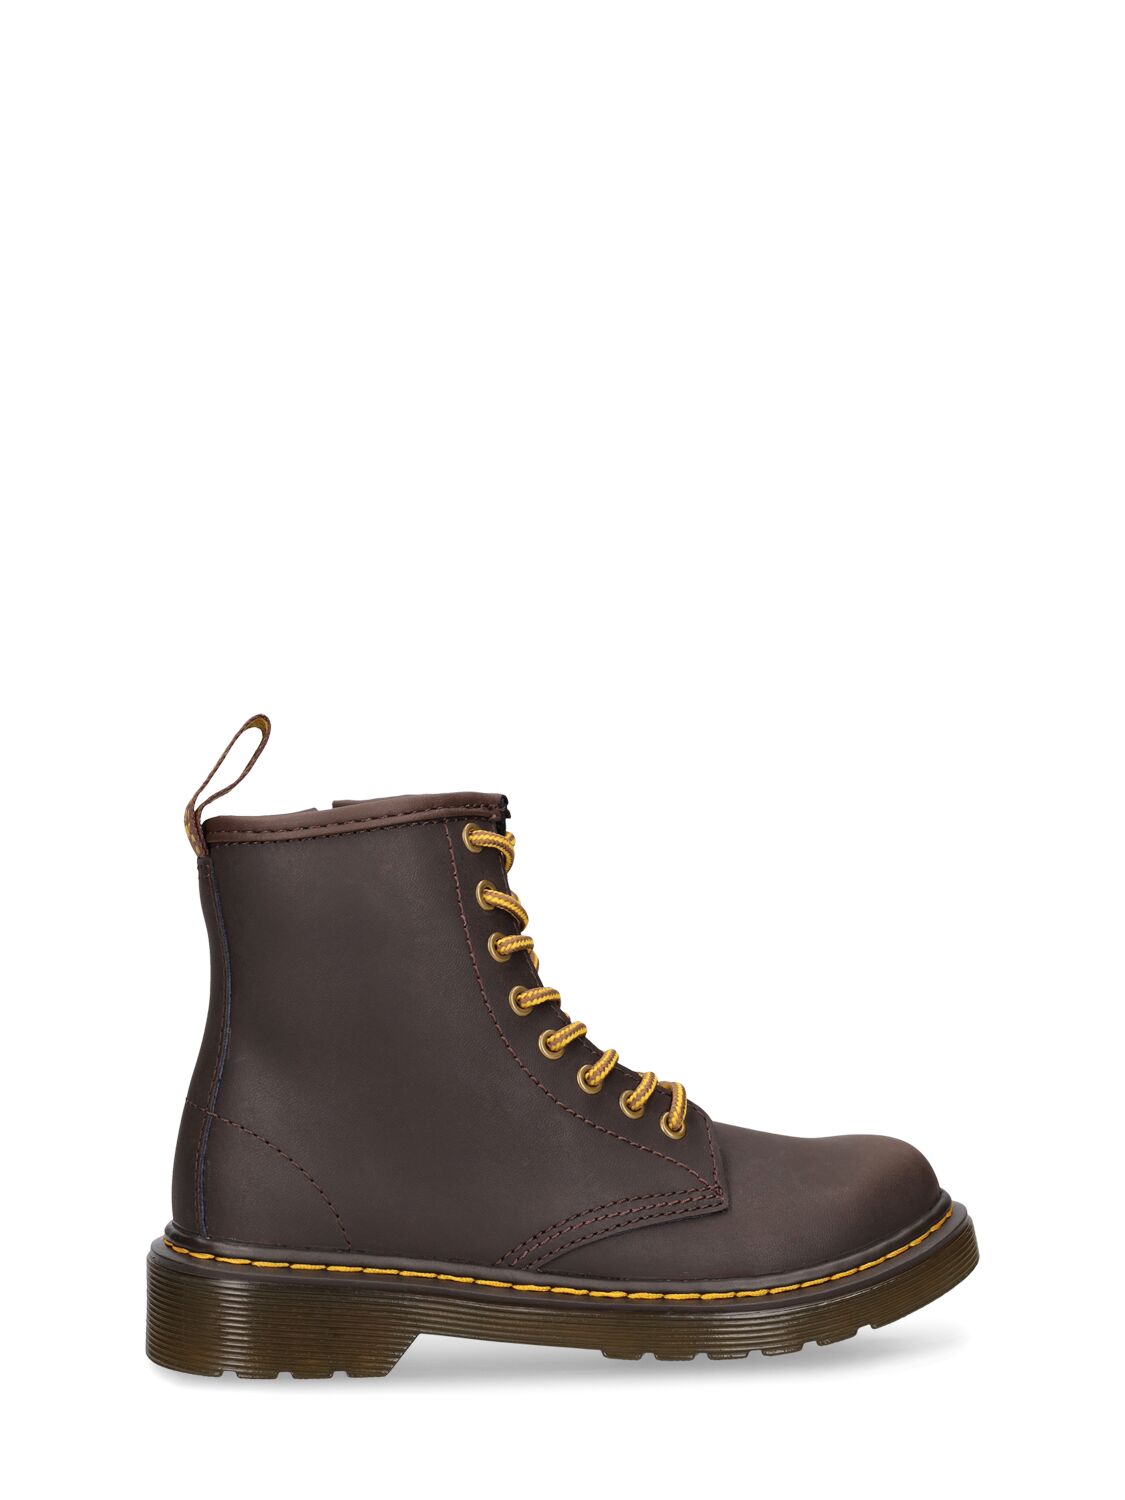 Dr. Martens' Kids' 1460 Leather Boots